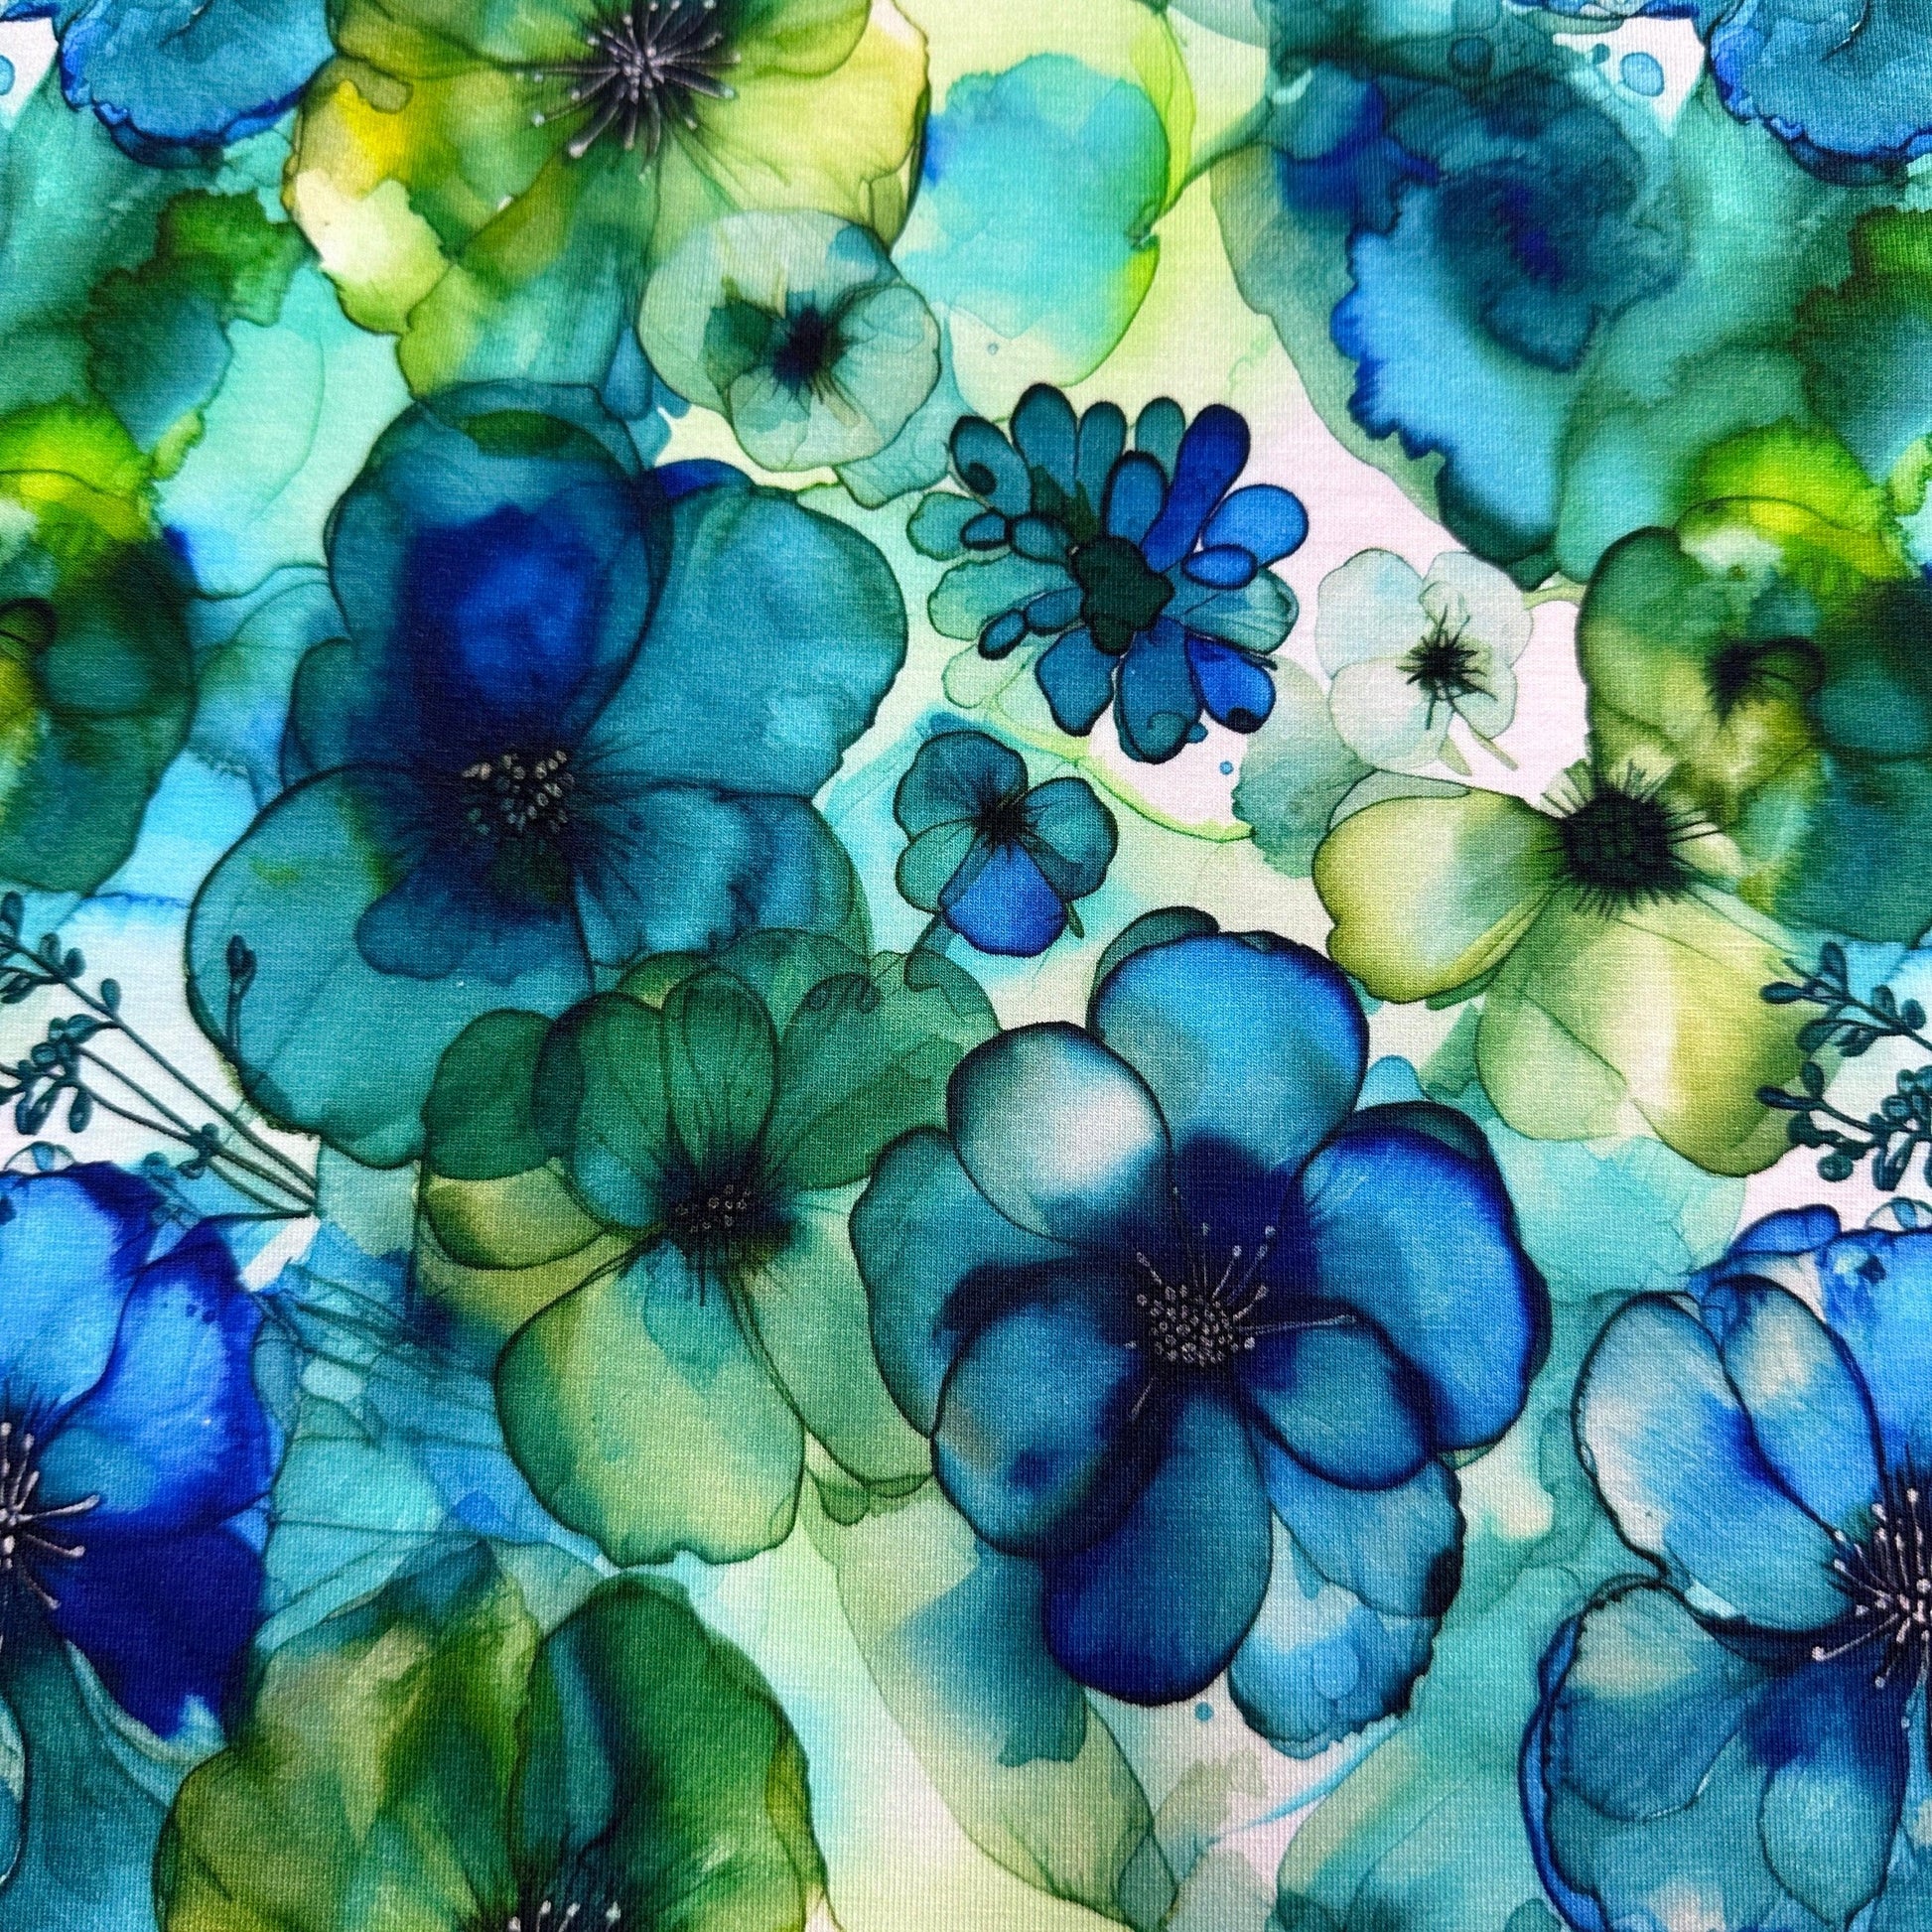 Floral Blue and Green Alcohol Ink on Organic Cotton/Spandex Jersey Fabric - Nature's Fabrics